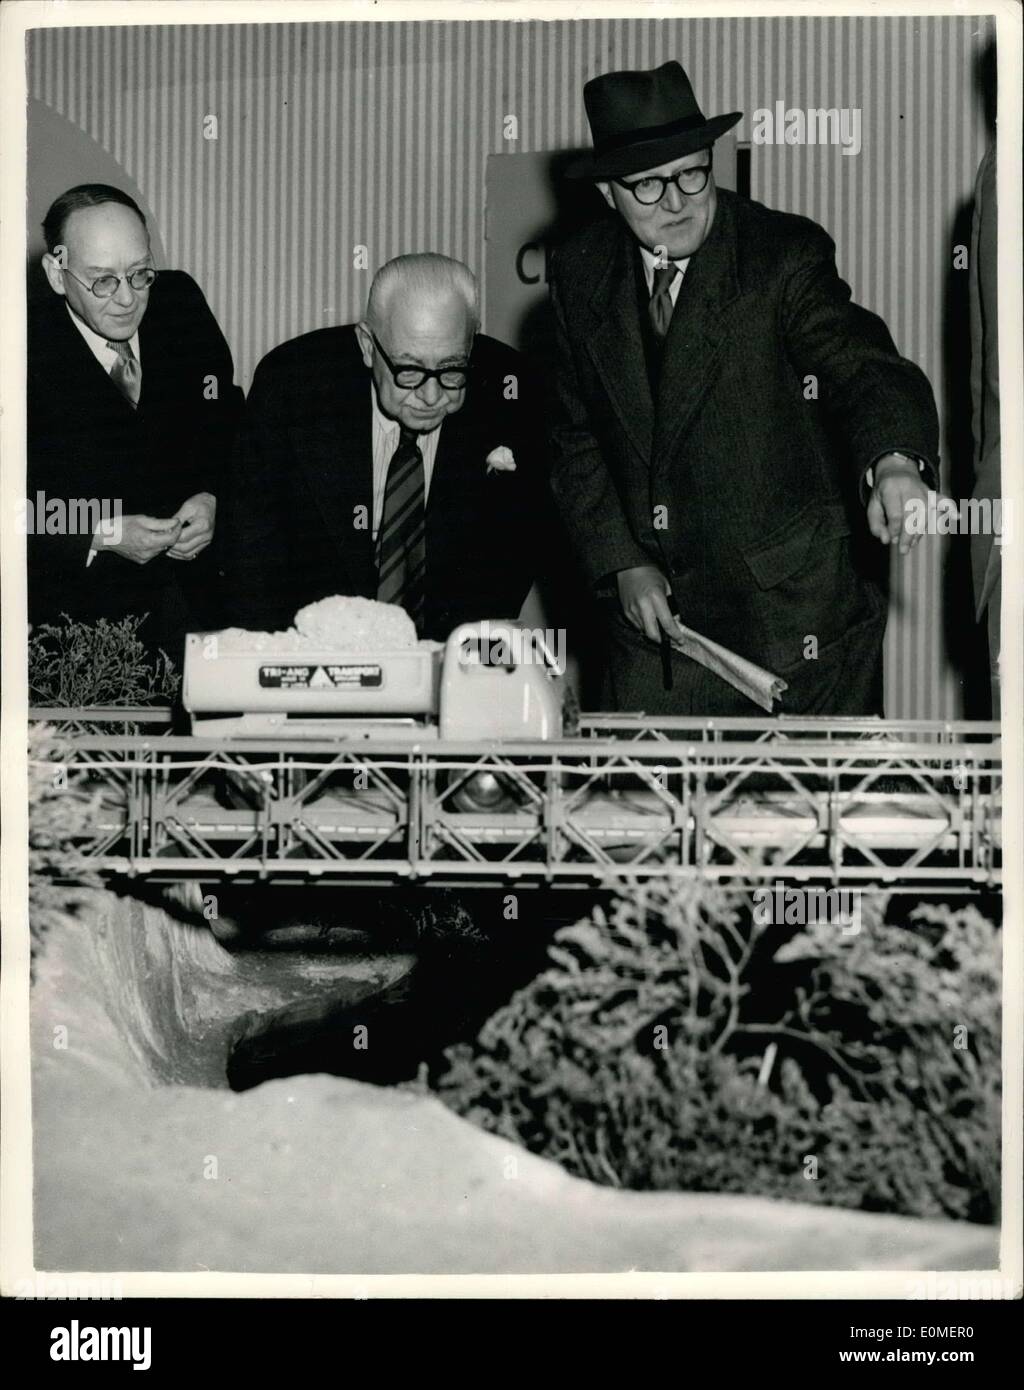 Nov. 18, 1954 - Inventory of Bailery Bridge At Exhibition; Sir Donald Balley, the billiant wartime inventor of the Bridge - today visited the Public Works and Municipal Services Exhibition, at Olympia. Photo Shows Sir Donald Bailey seen pointing out the structure of a model Bailey Bridge, to Major J.A.L. Thomas, Chairman of the Exhibition (centre), at the Exhibition today. Stock Photo